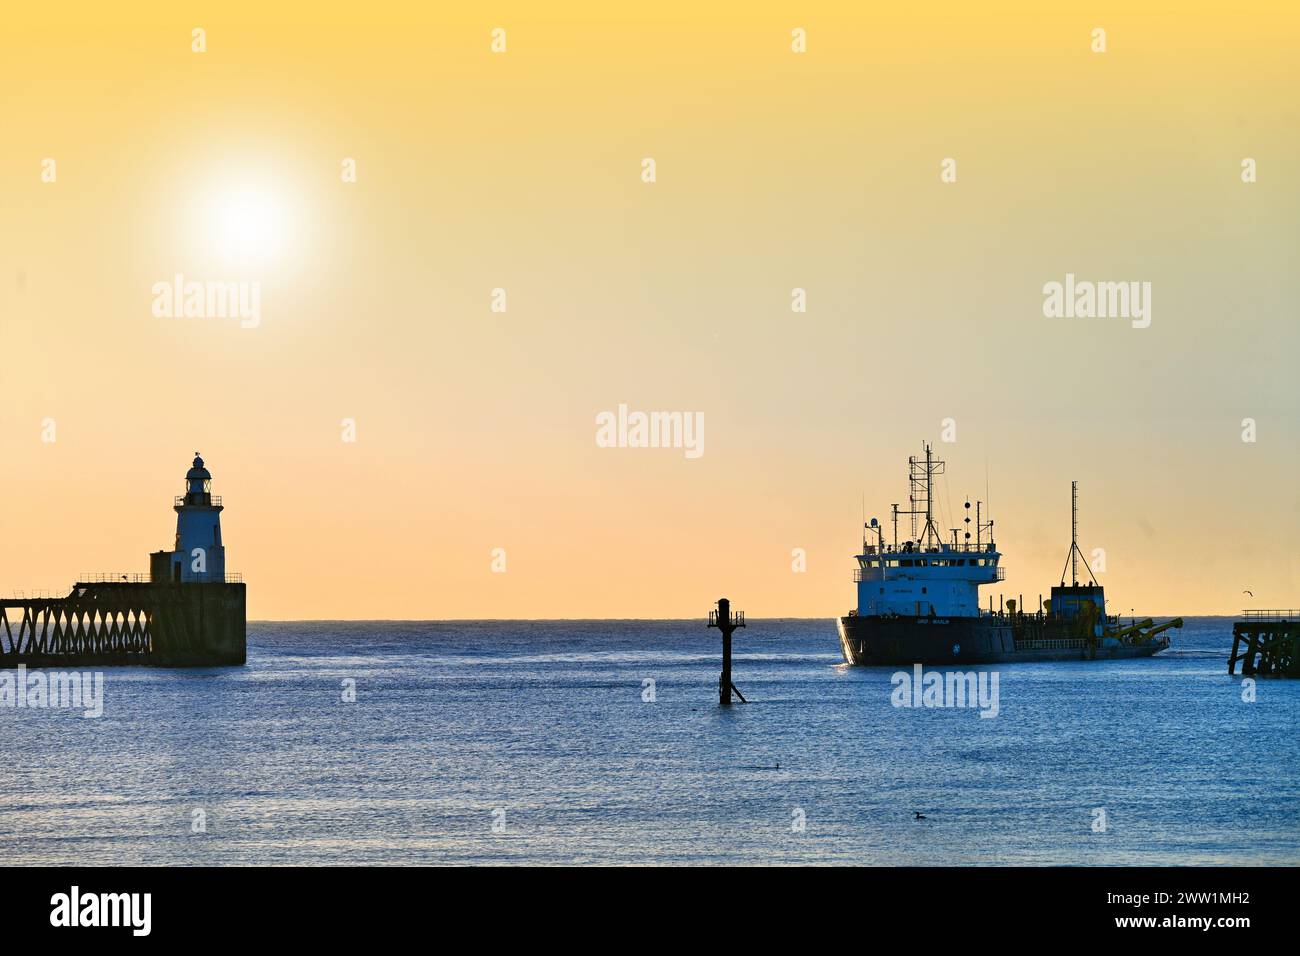 Suction dredger UKD Marlin working at Blyth harbour  Northumberland early dawn against orange sky Stock Photo